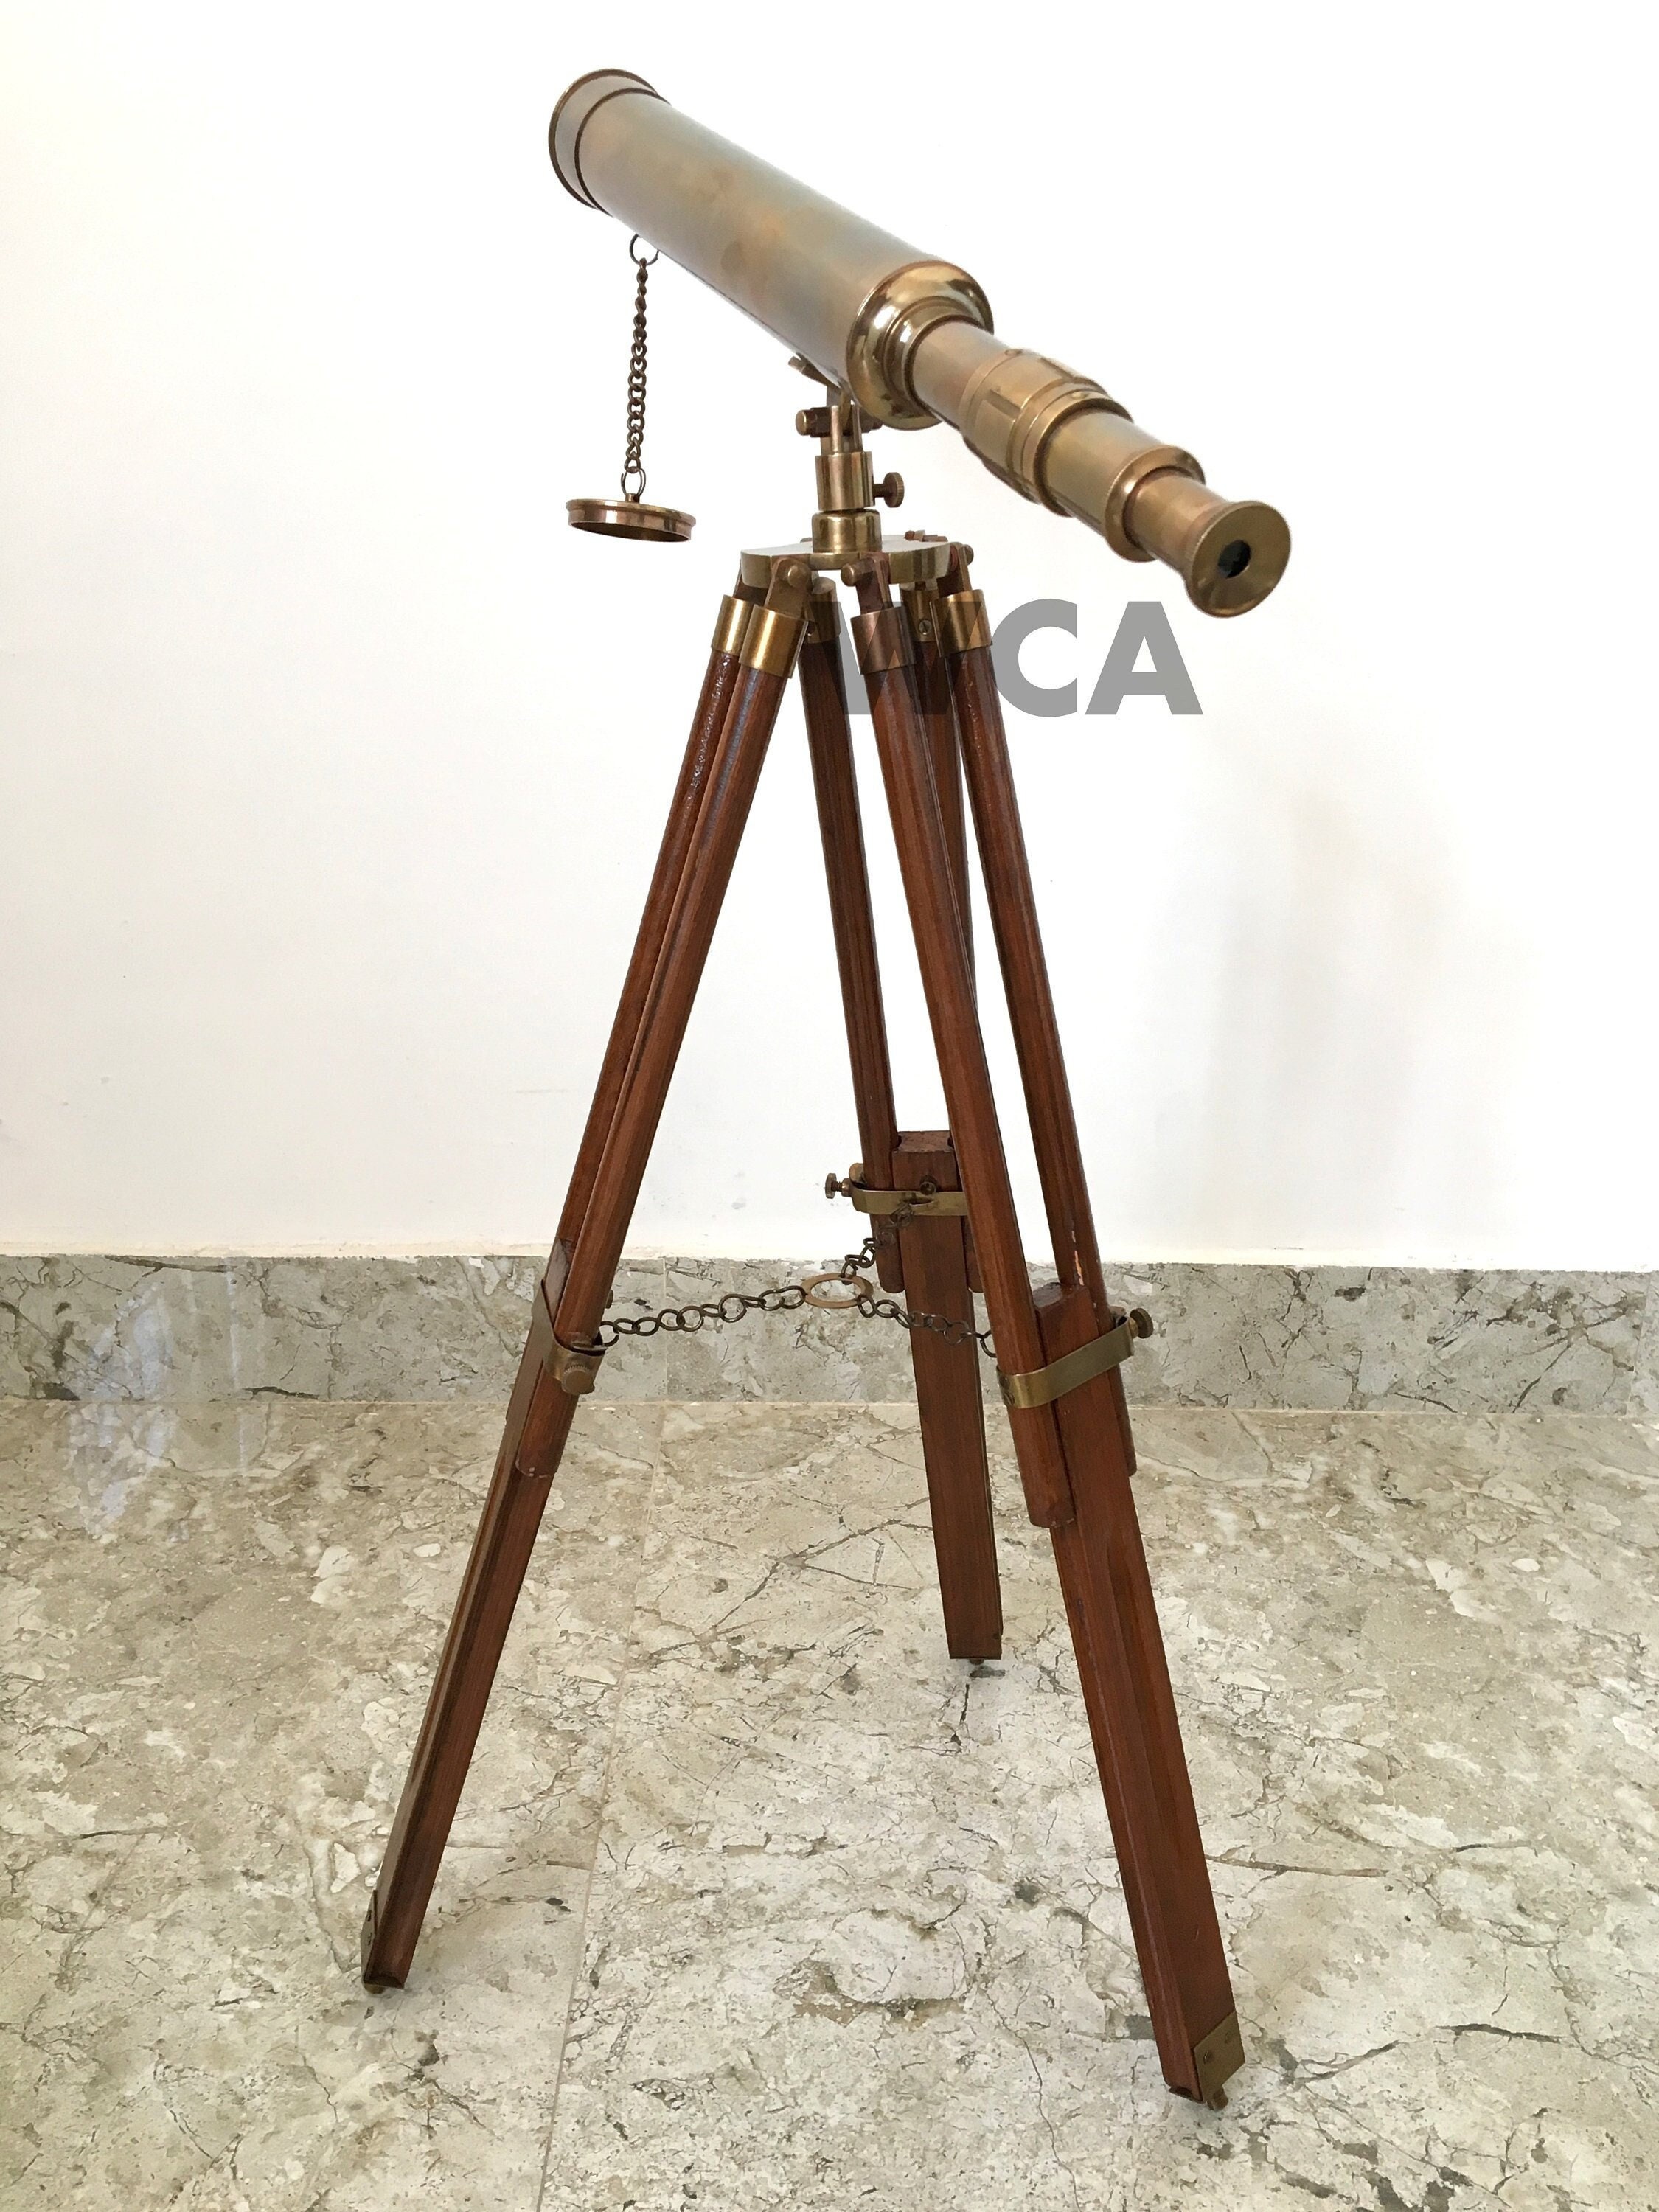 Collectible Nautical Antique Brass Spyglass Telescope With Wooden Tripod Scope G 